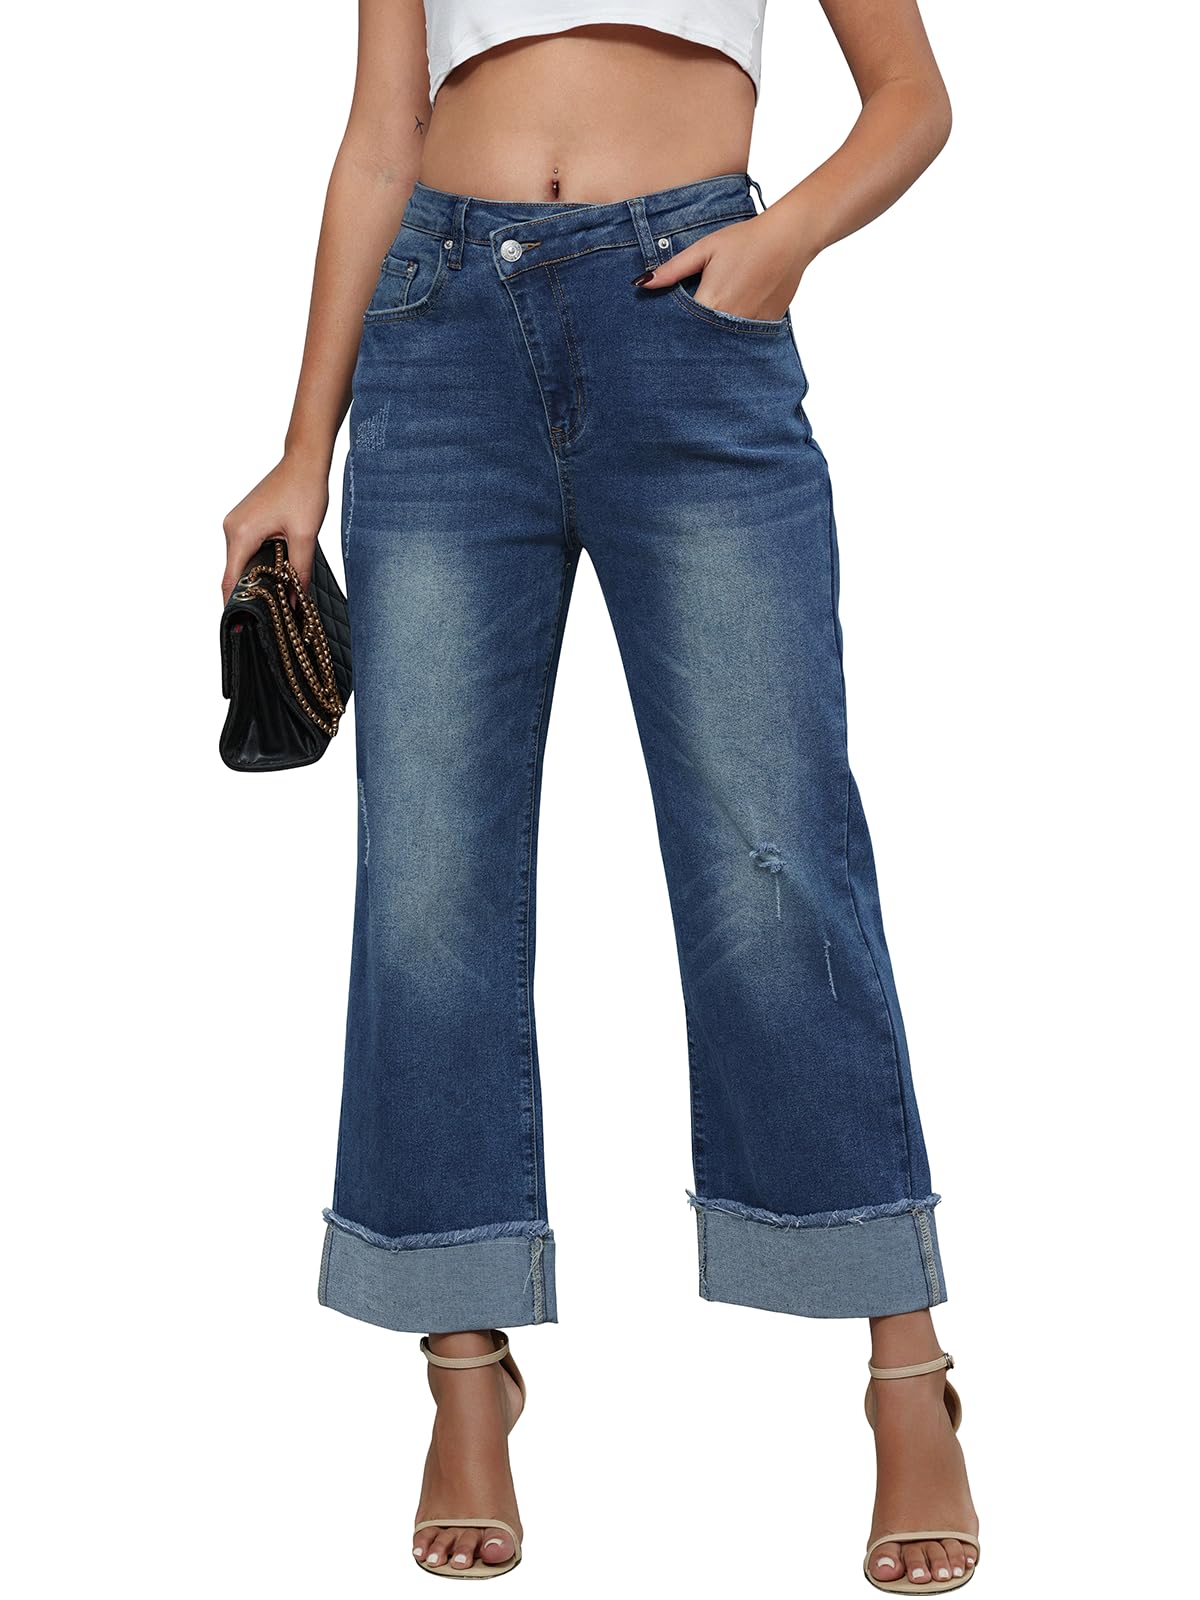 Genleck Women's Wide Leg High Waisted Jeans Crossover Baggy Jeans